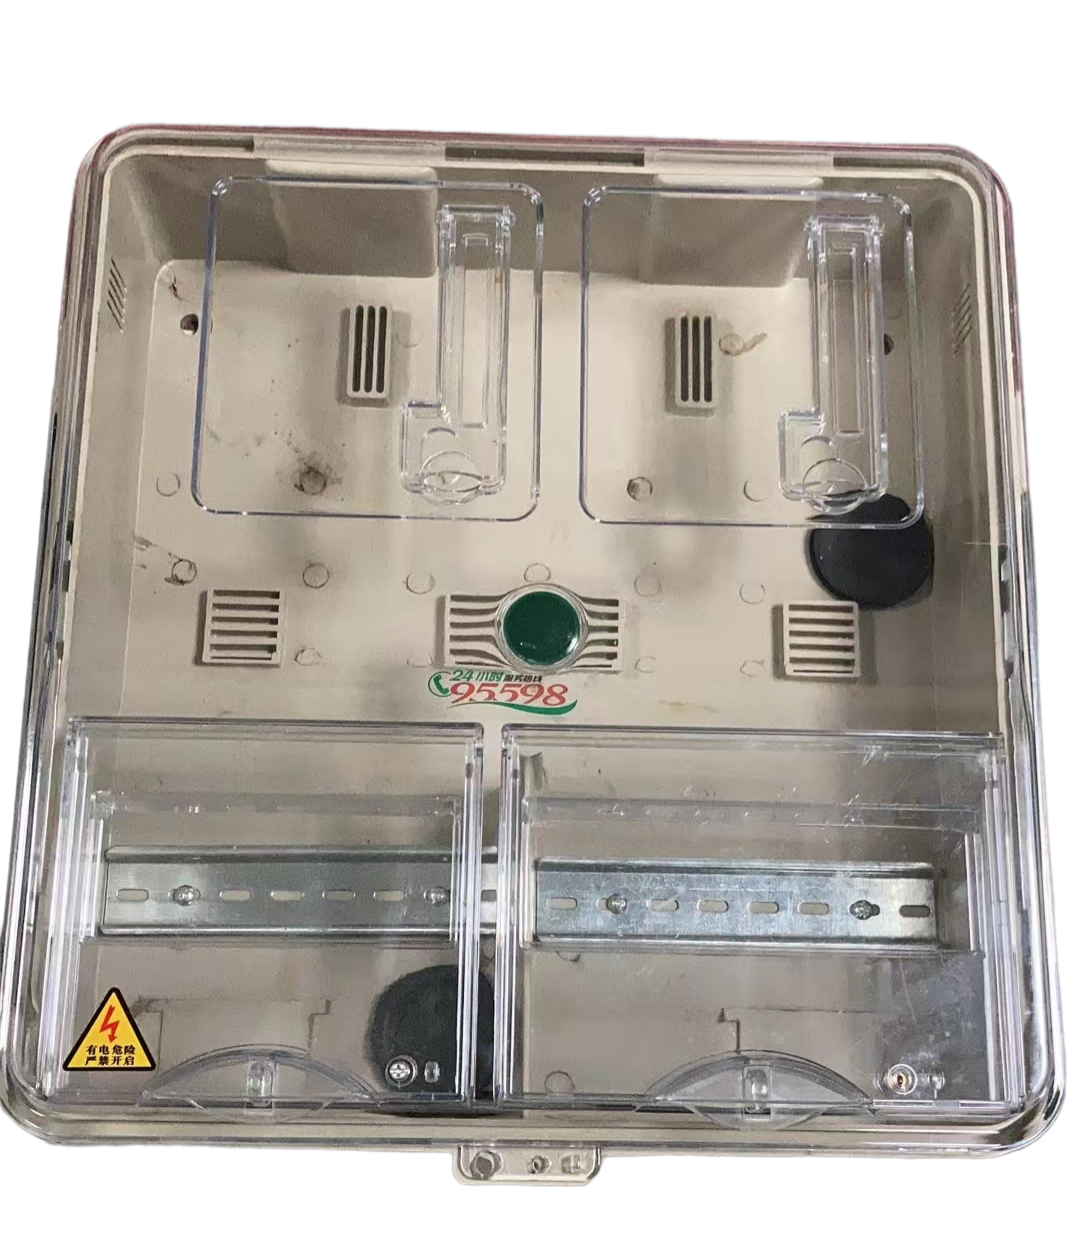 2 in 1 Outdoor Transparent Plastic Electrical Meter Box